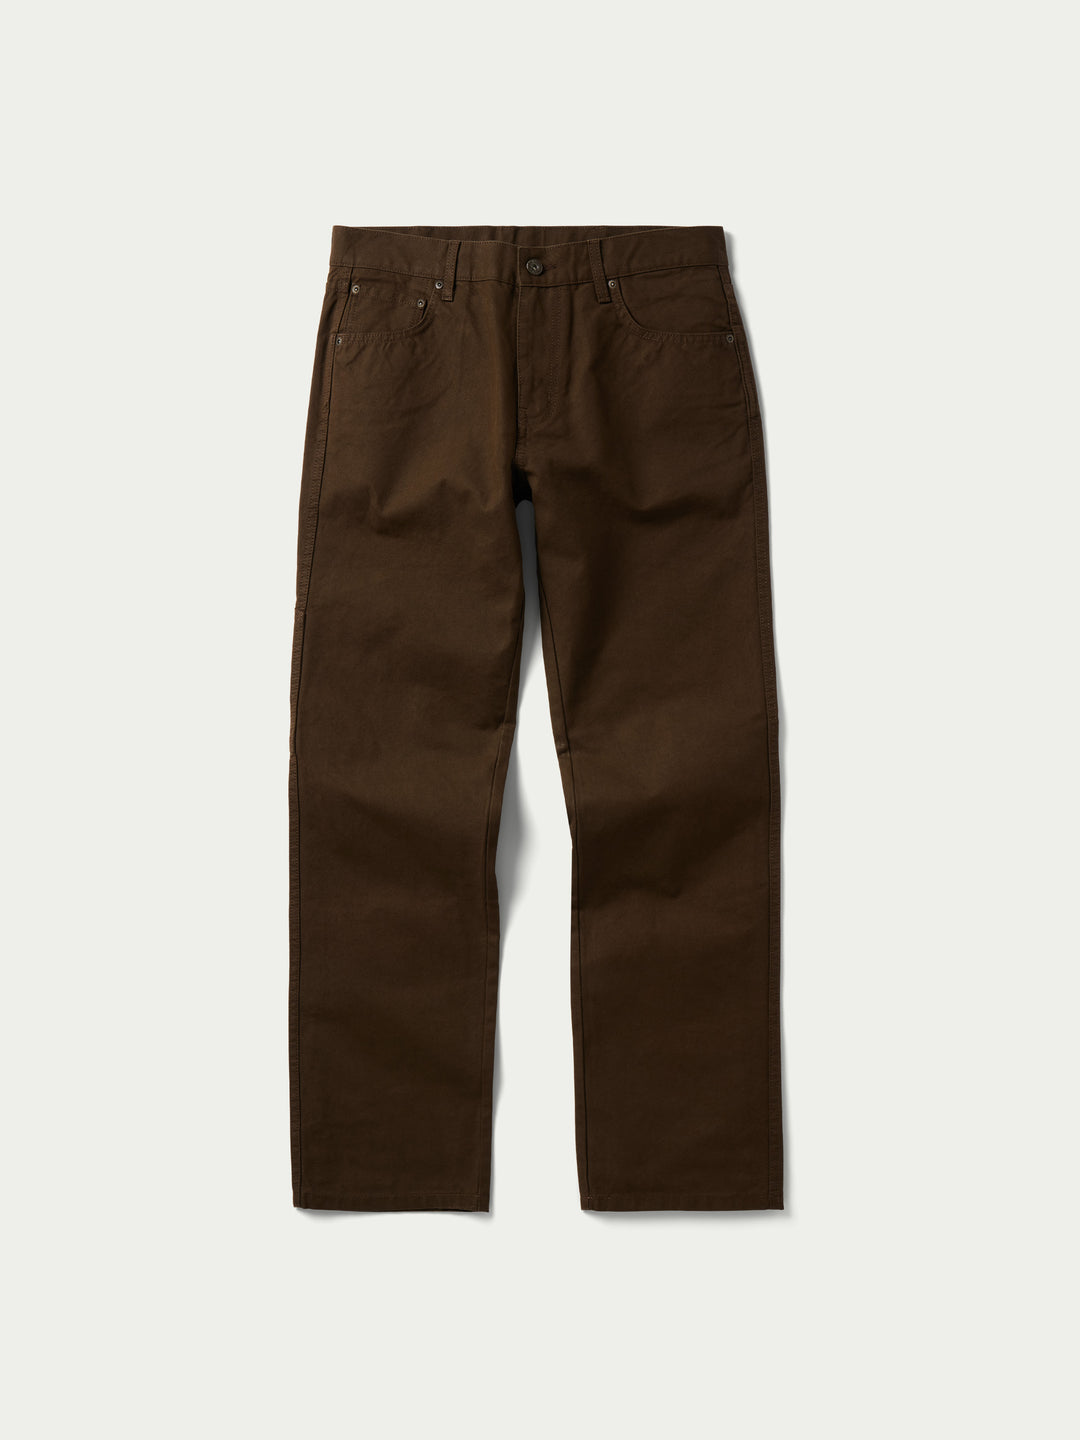 FENCELINE RANCH HAND DUNGAREE - Schaefer Outfitter